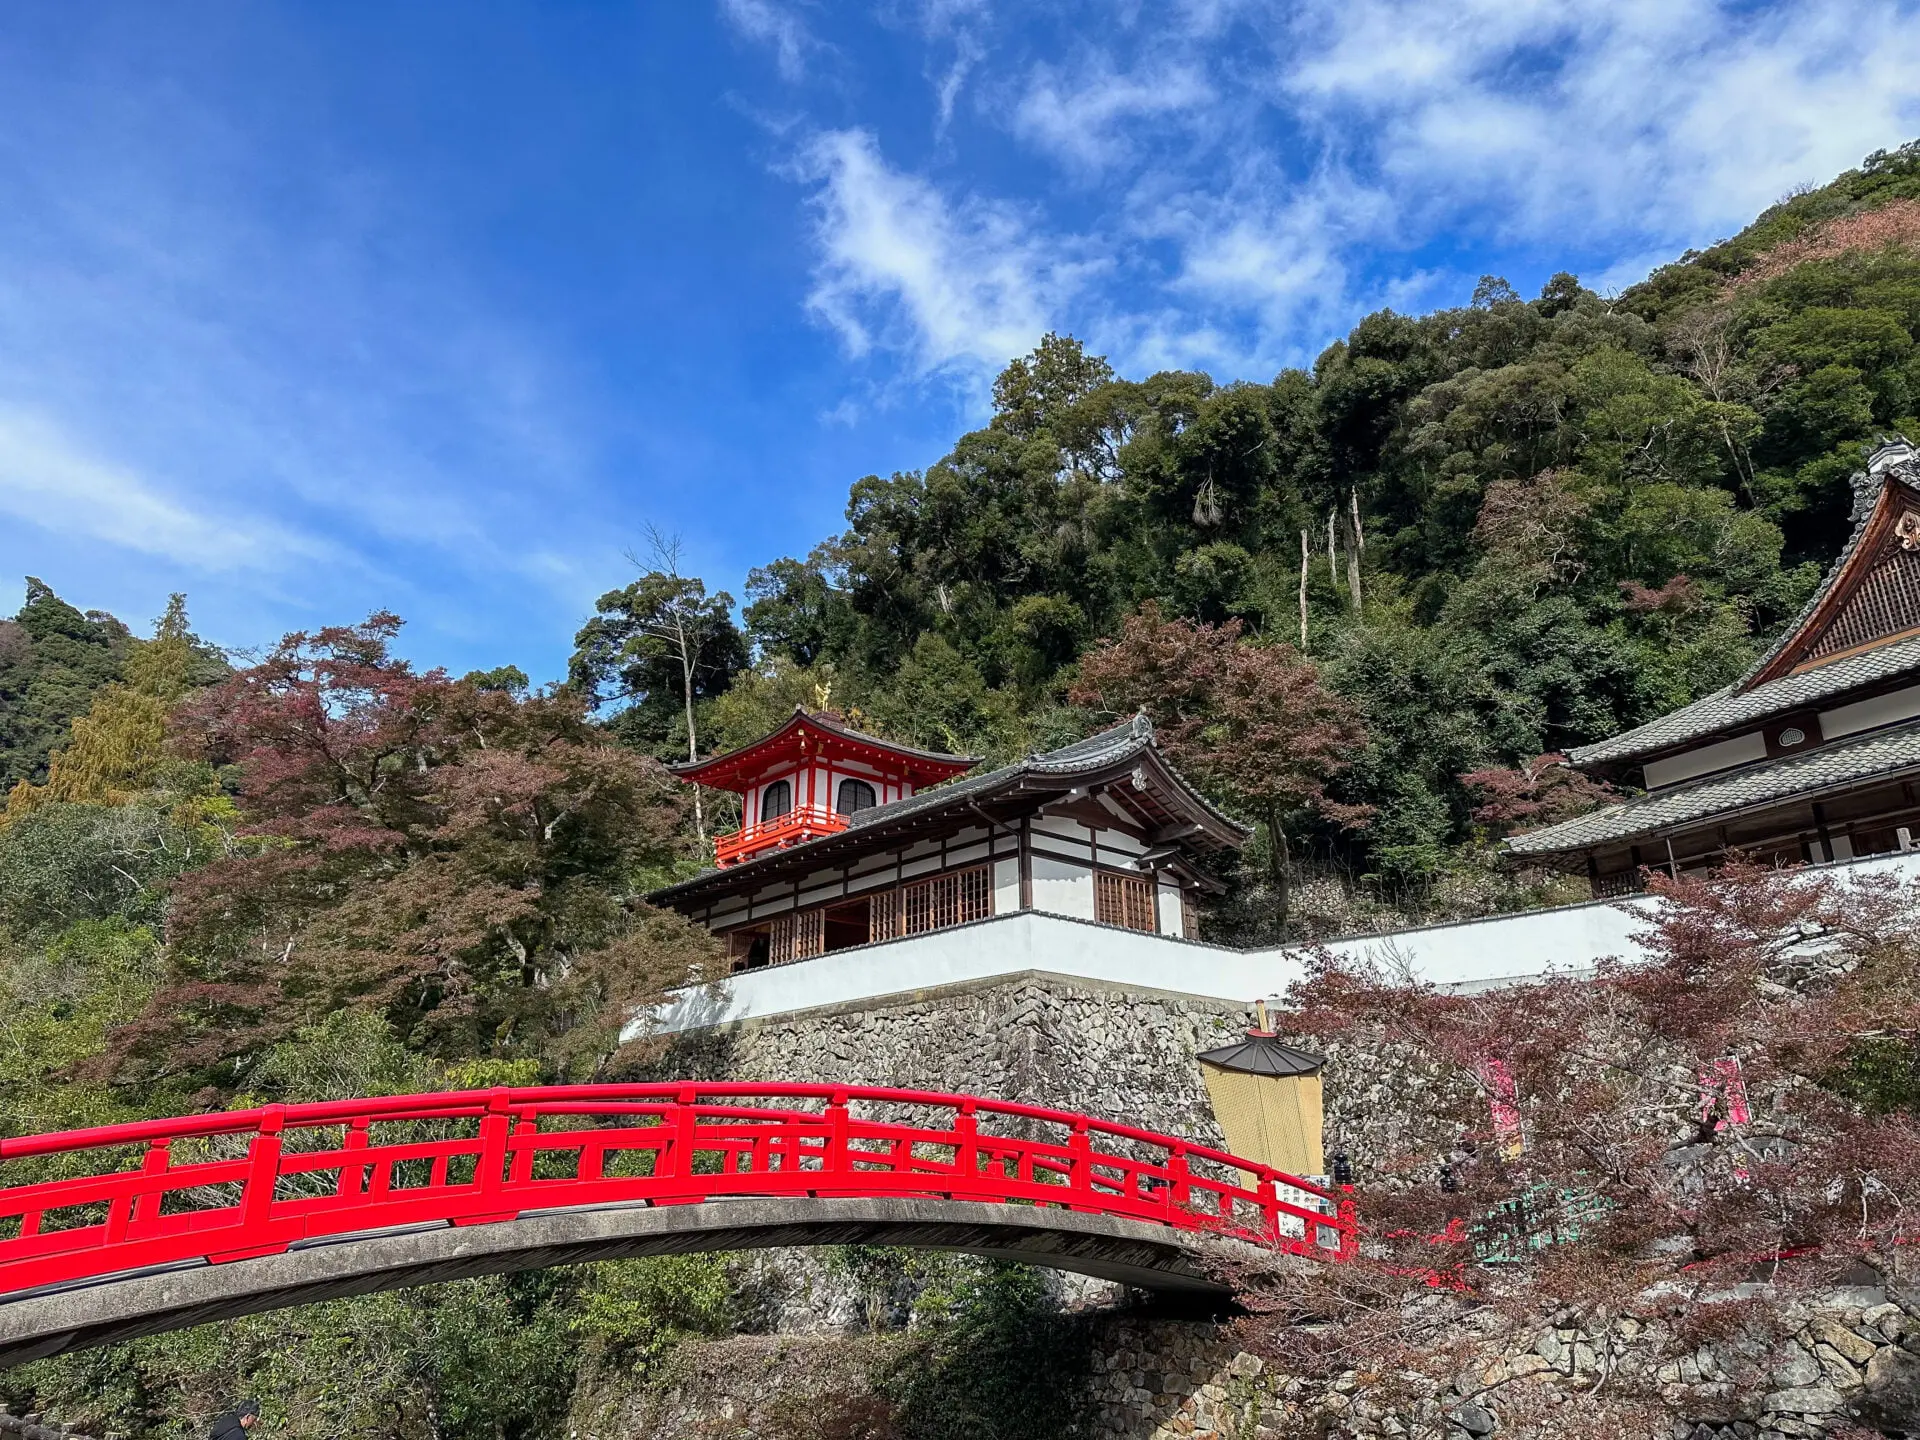 Minoo Park is a great day trip from Osaka